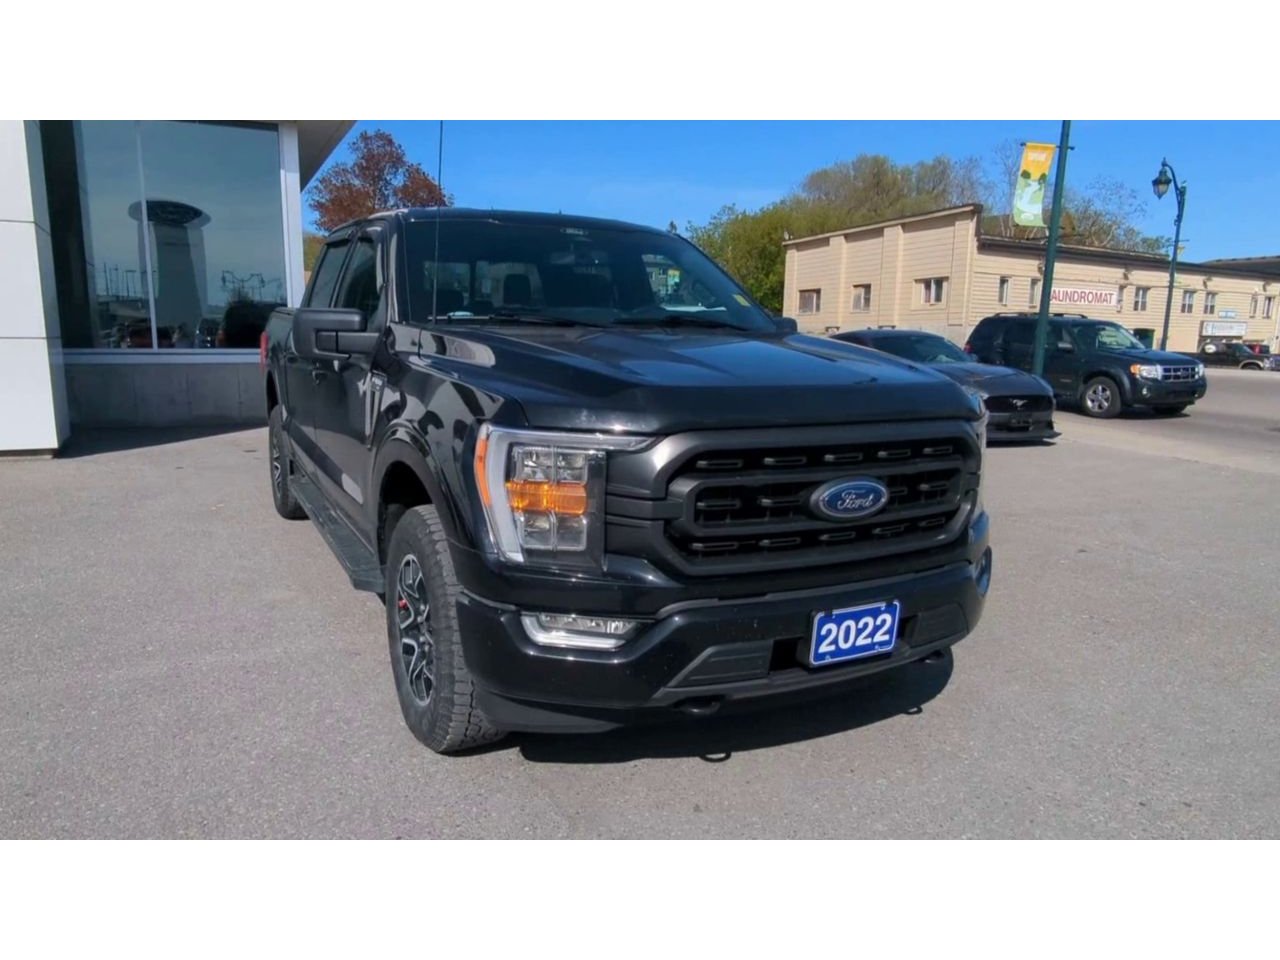 2022 Ford F-150 - 21789A Full Image 3